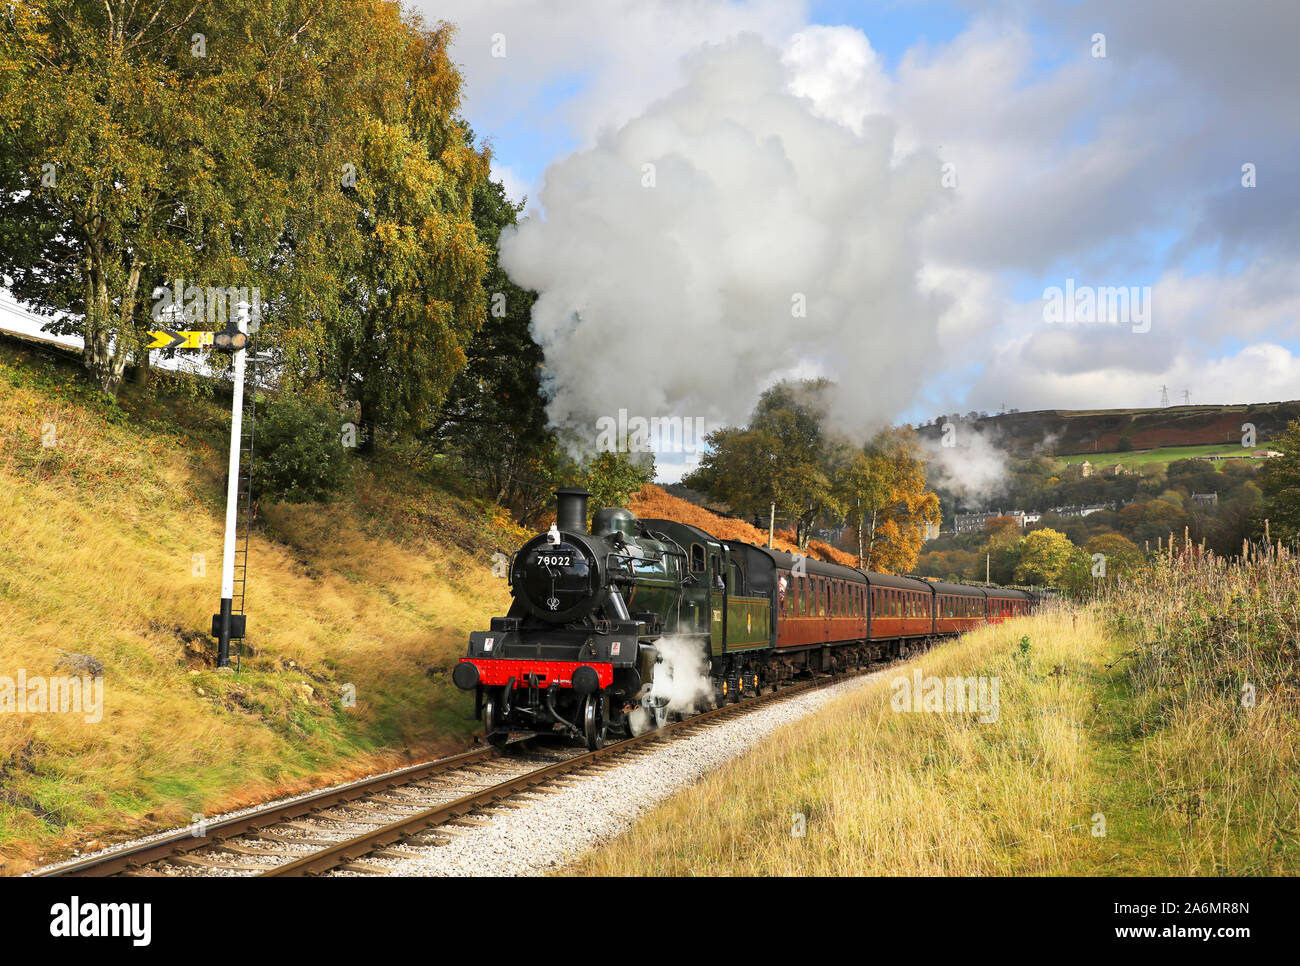 78022 approaches Oakworth on the Keighley & Worth Valley Railway. Stock Photo